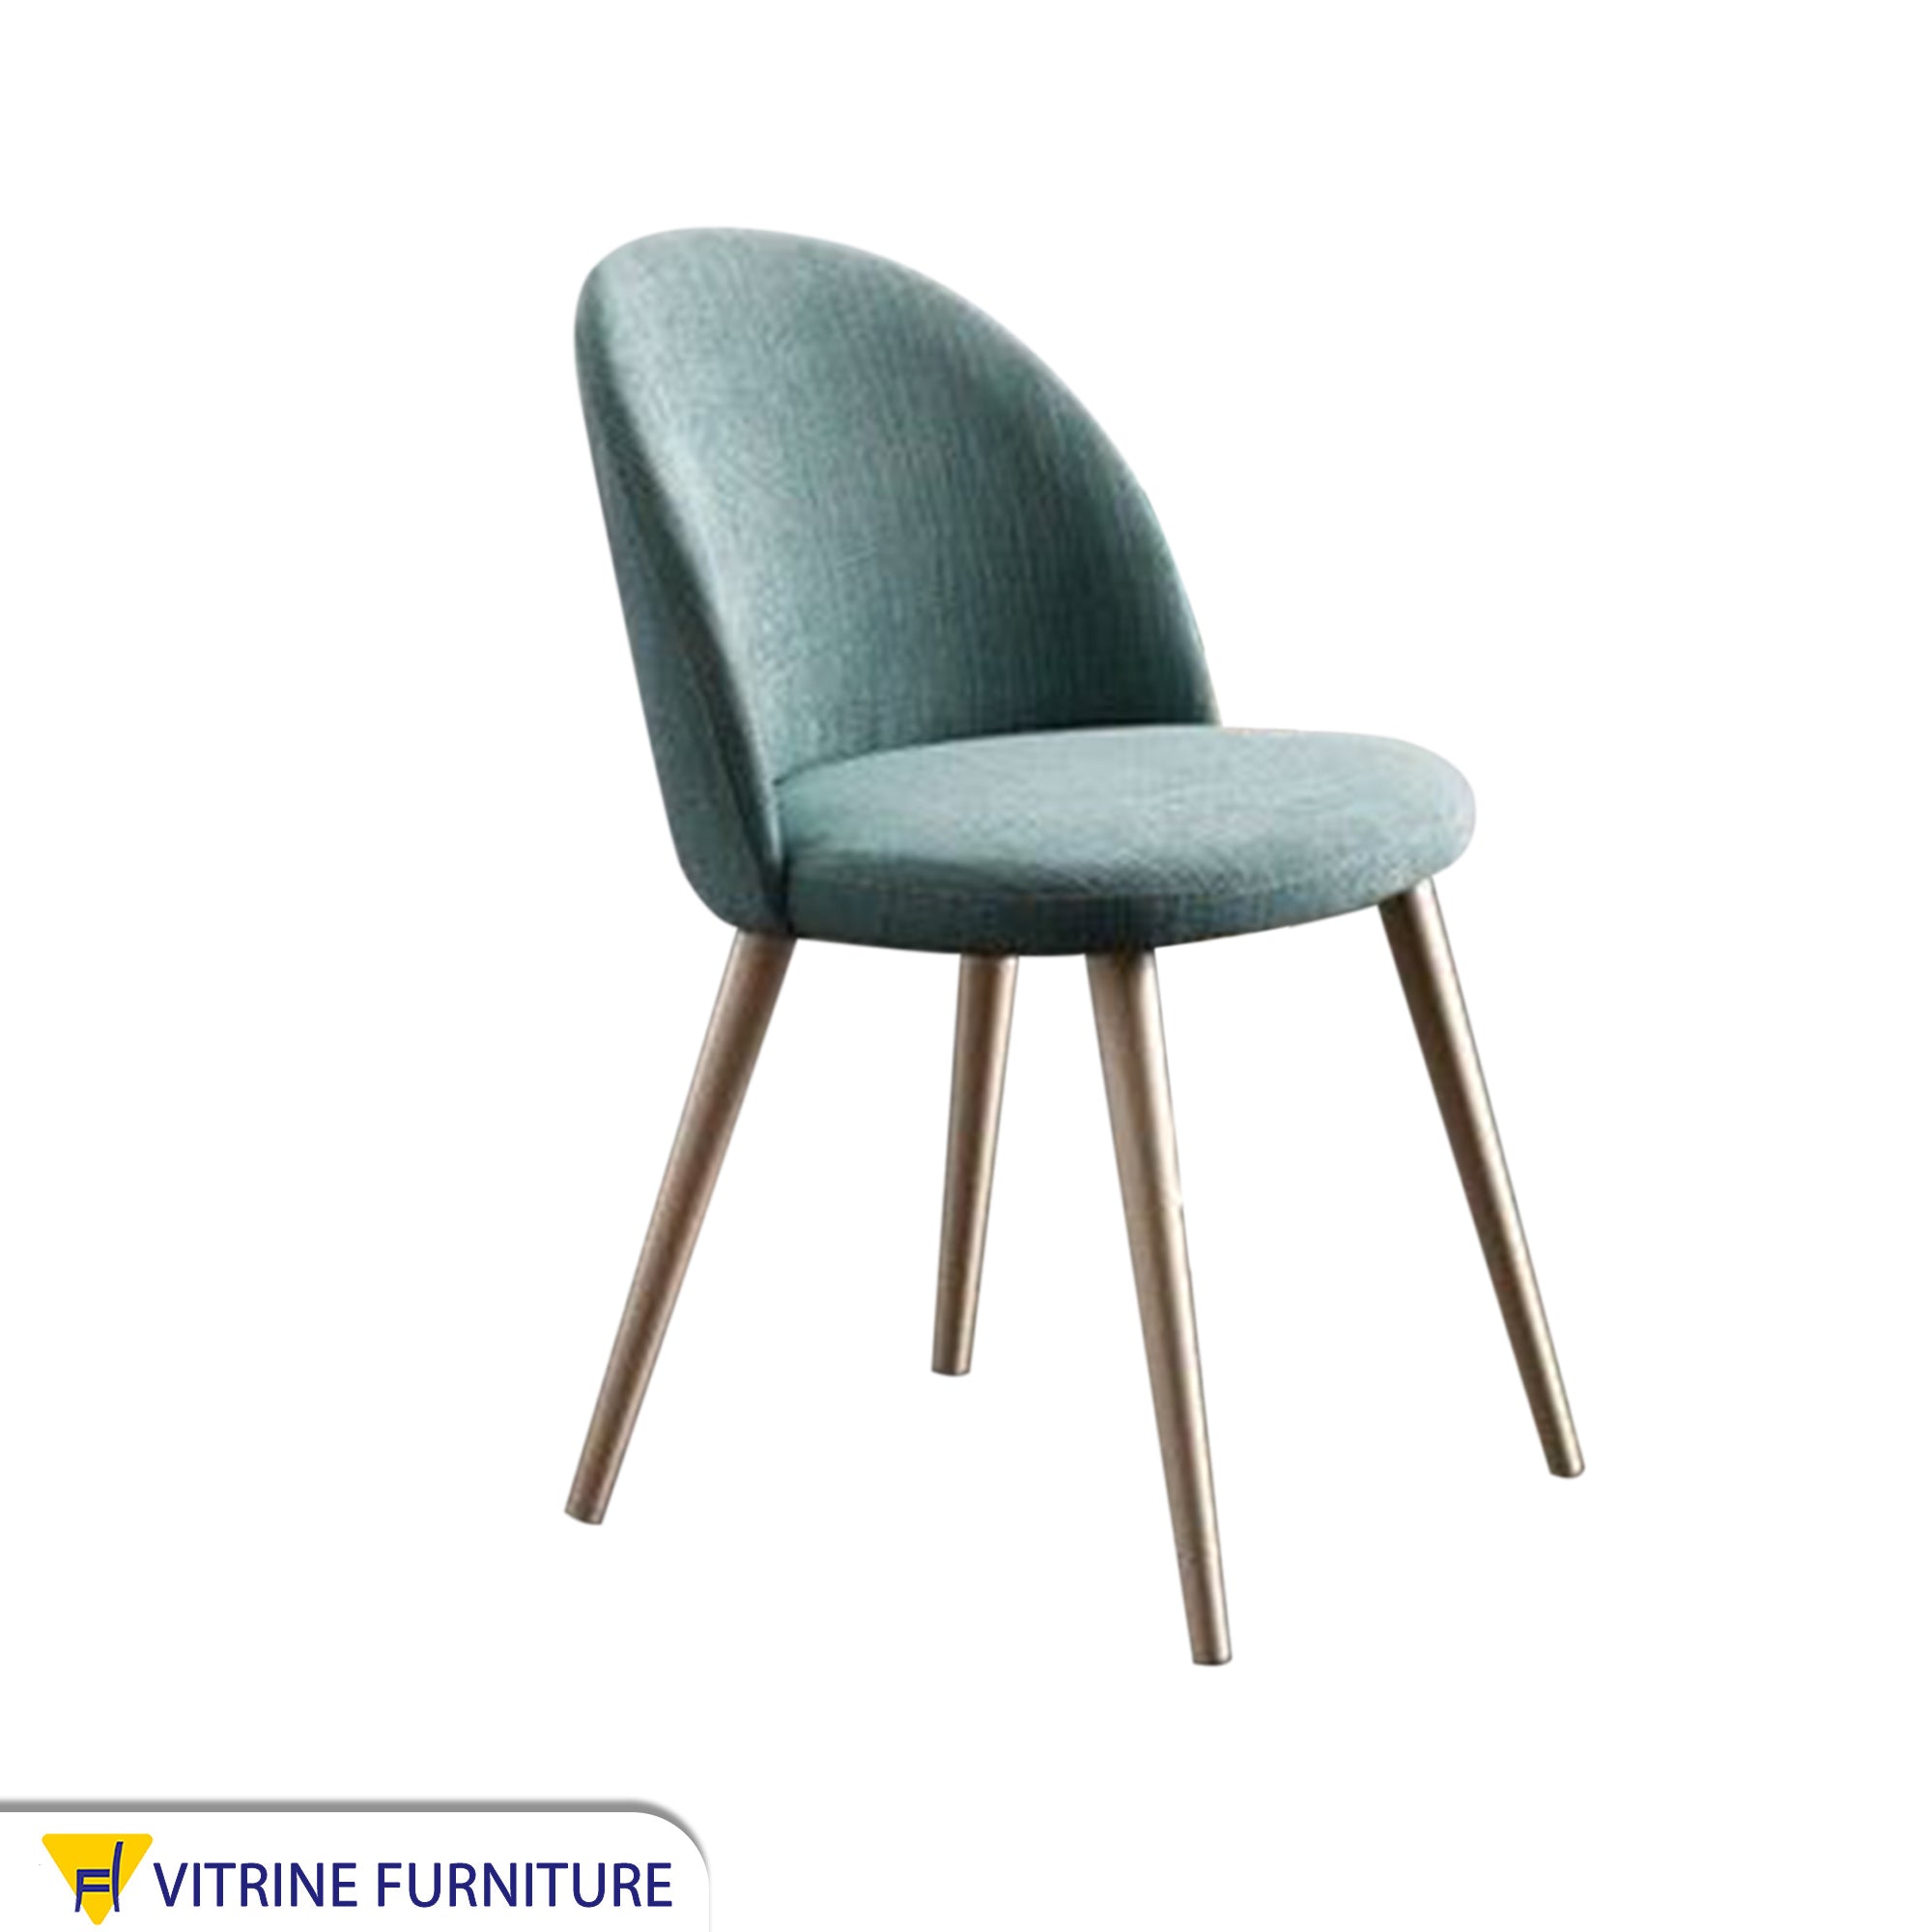 Round back chair upholstered in mint green